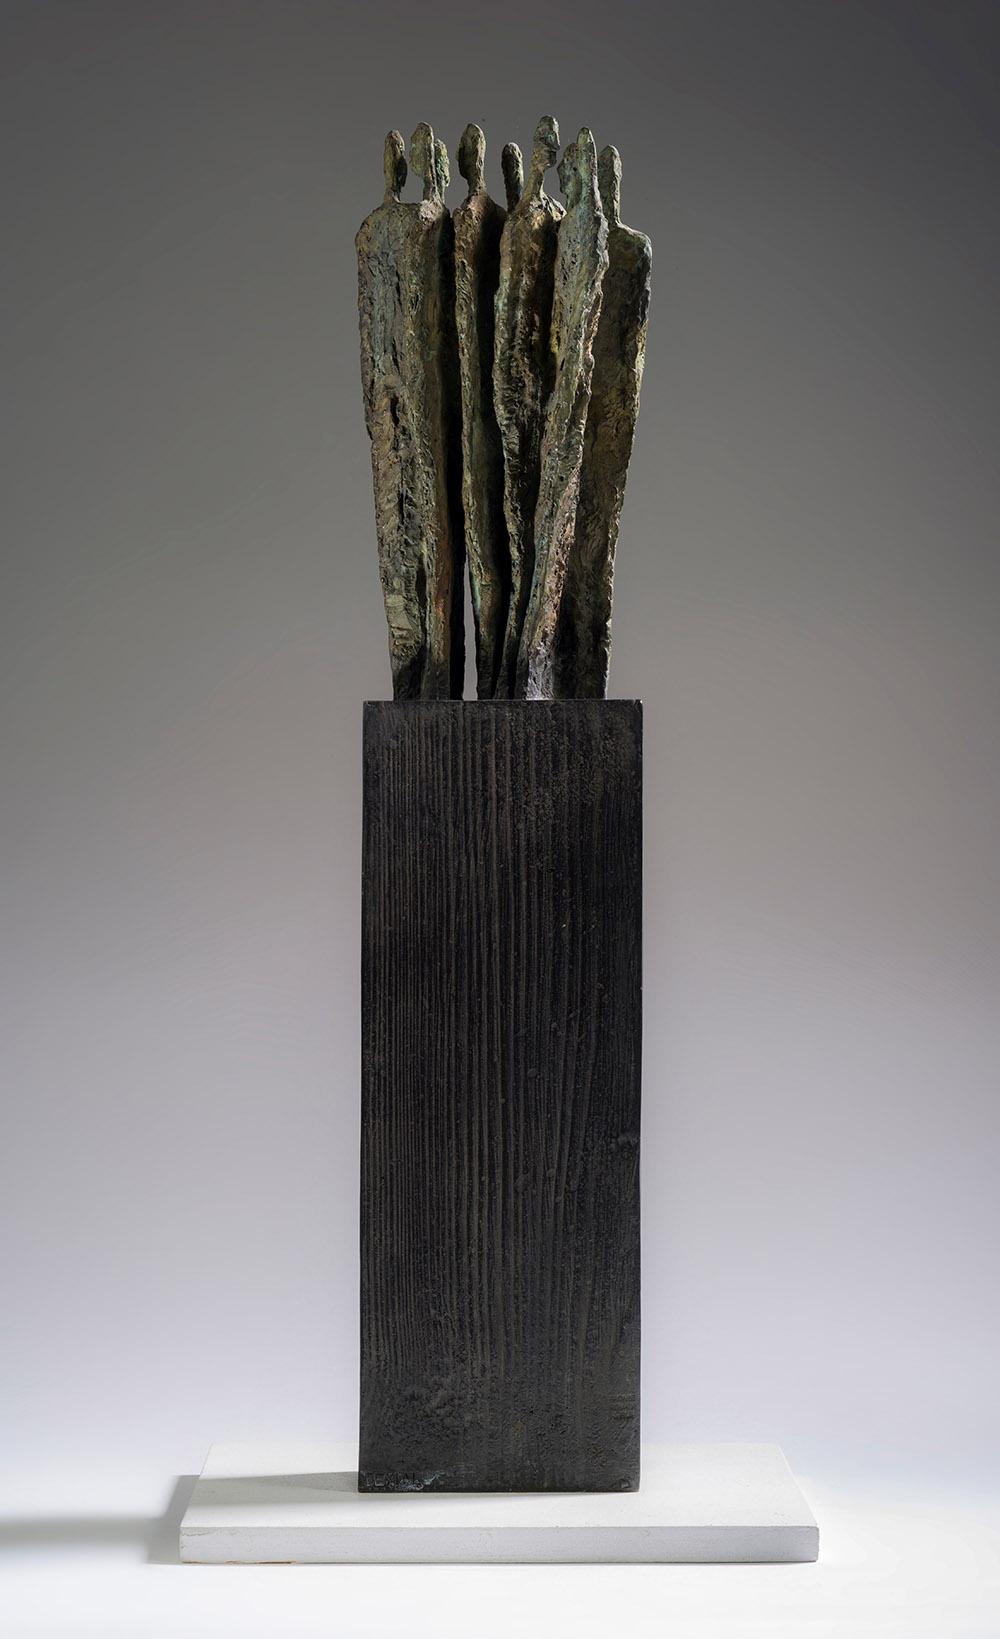 The Ones is a bronze sculpture by French contemporary artist Martine Demal, dimensions are 51 × 10 × 6 cm (20.1 × 3.9 × 2.4 in). 
The sculpture is signed and numbered, it is part of a limited edition of 8 editions + 4 artist’s proofs, and comes with